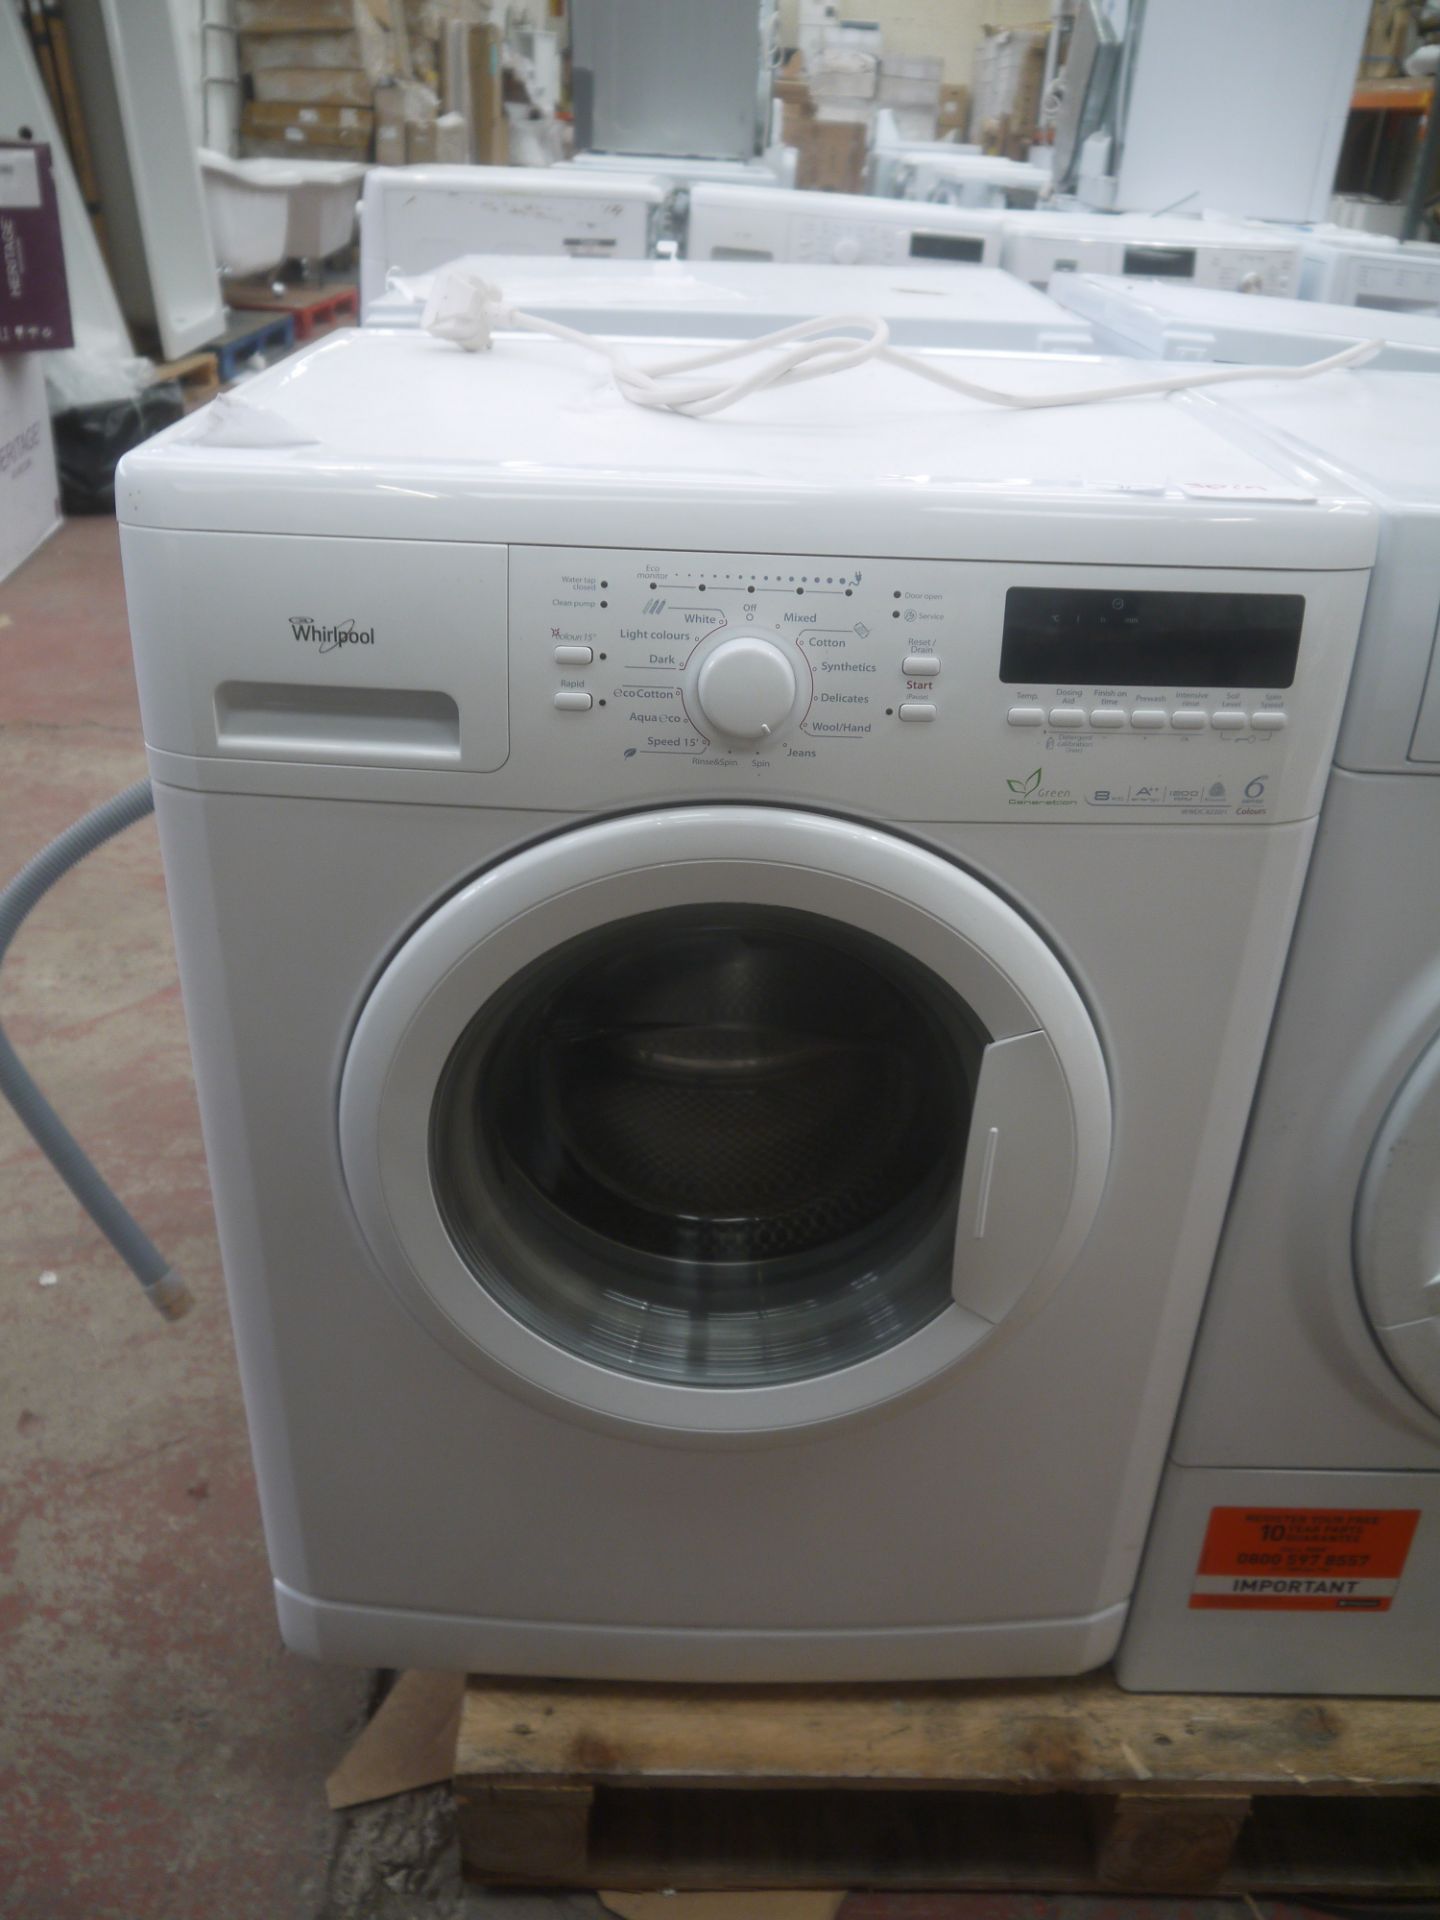 Whirlpool washing machine, 8kg, powers on and spins.